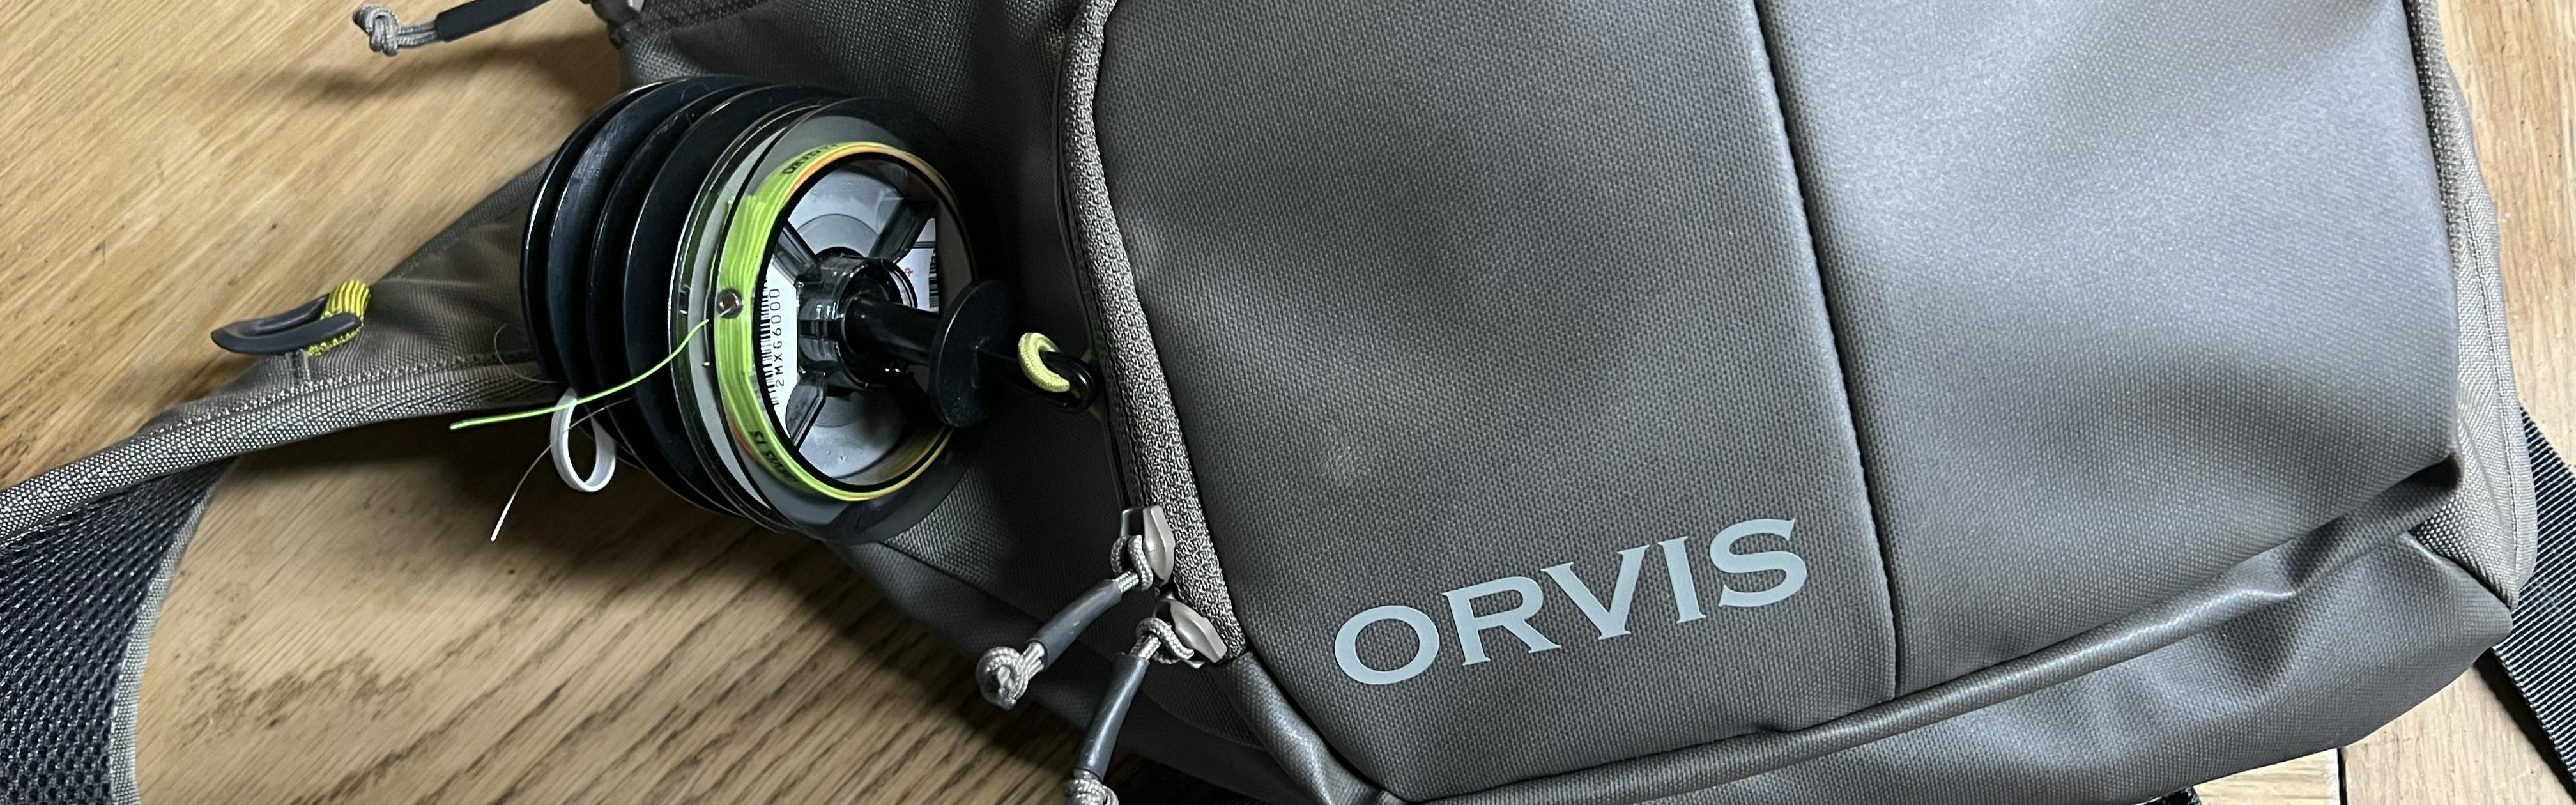 ORVIS SLING PACK MID SIZE REVIEW - WATCH BEFORE YOU